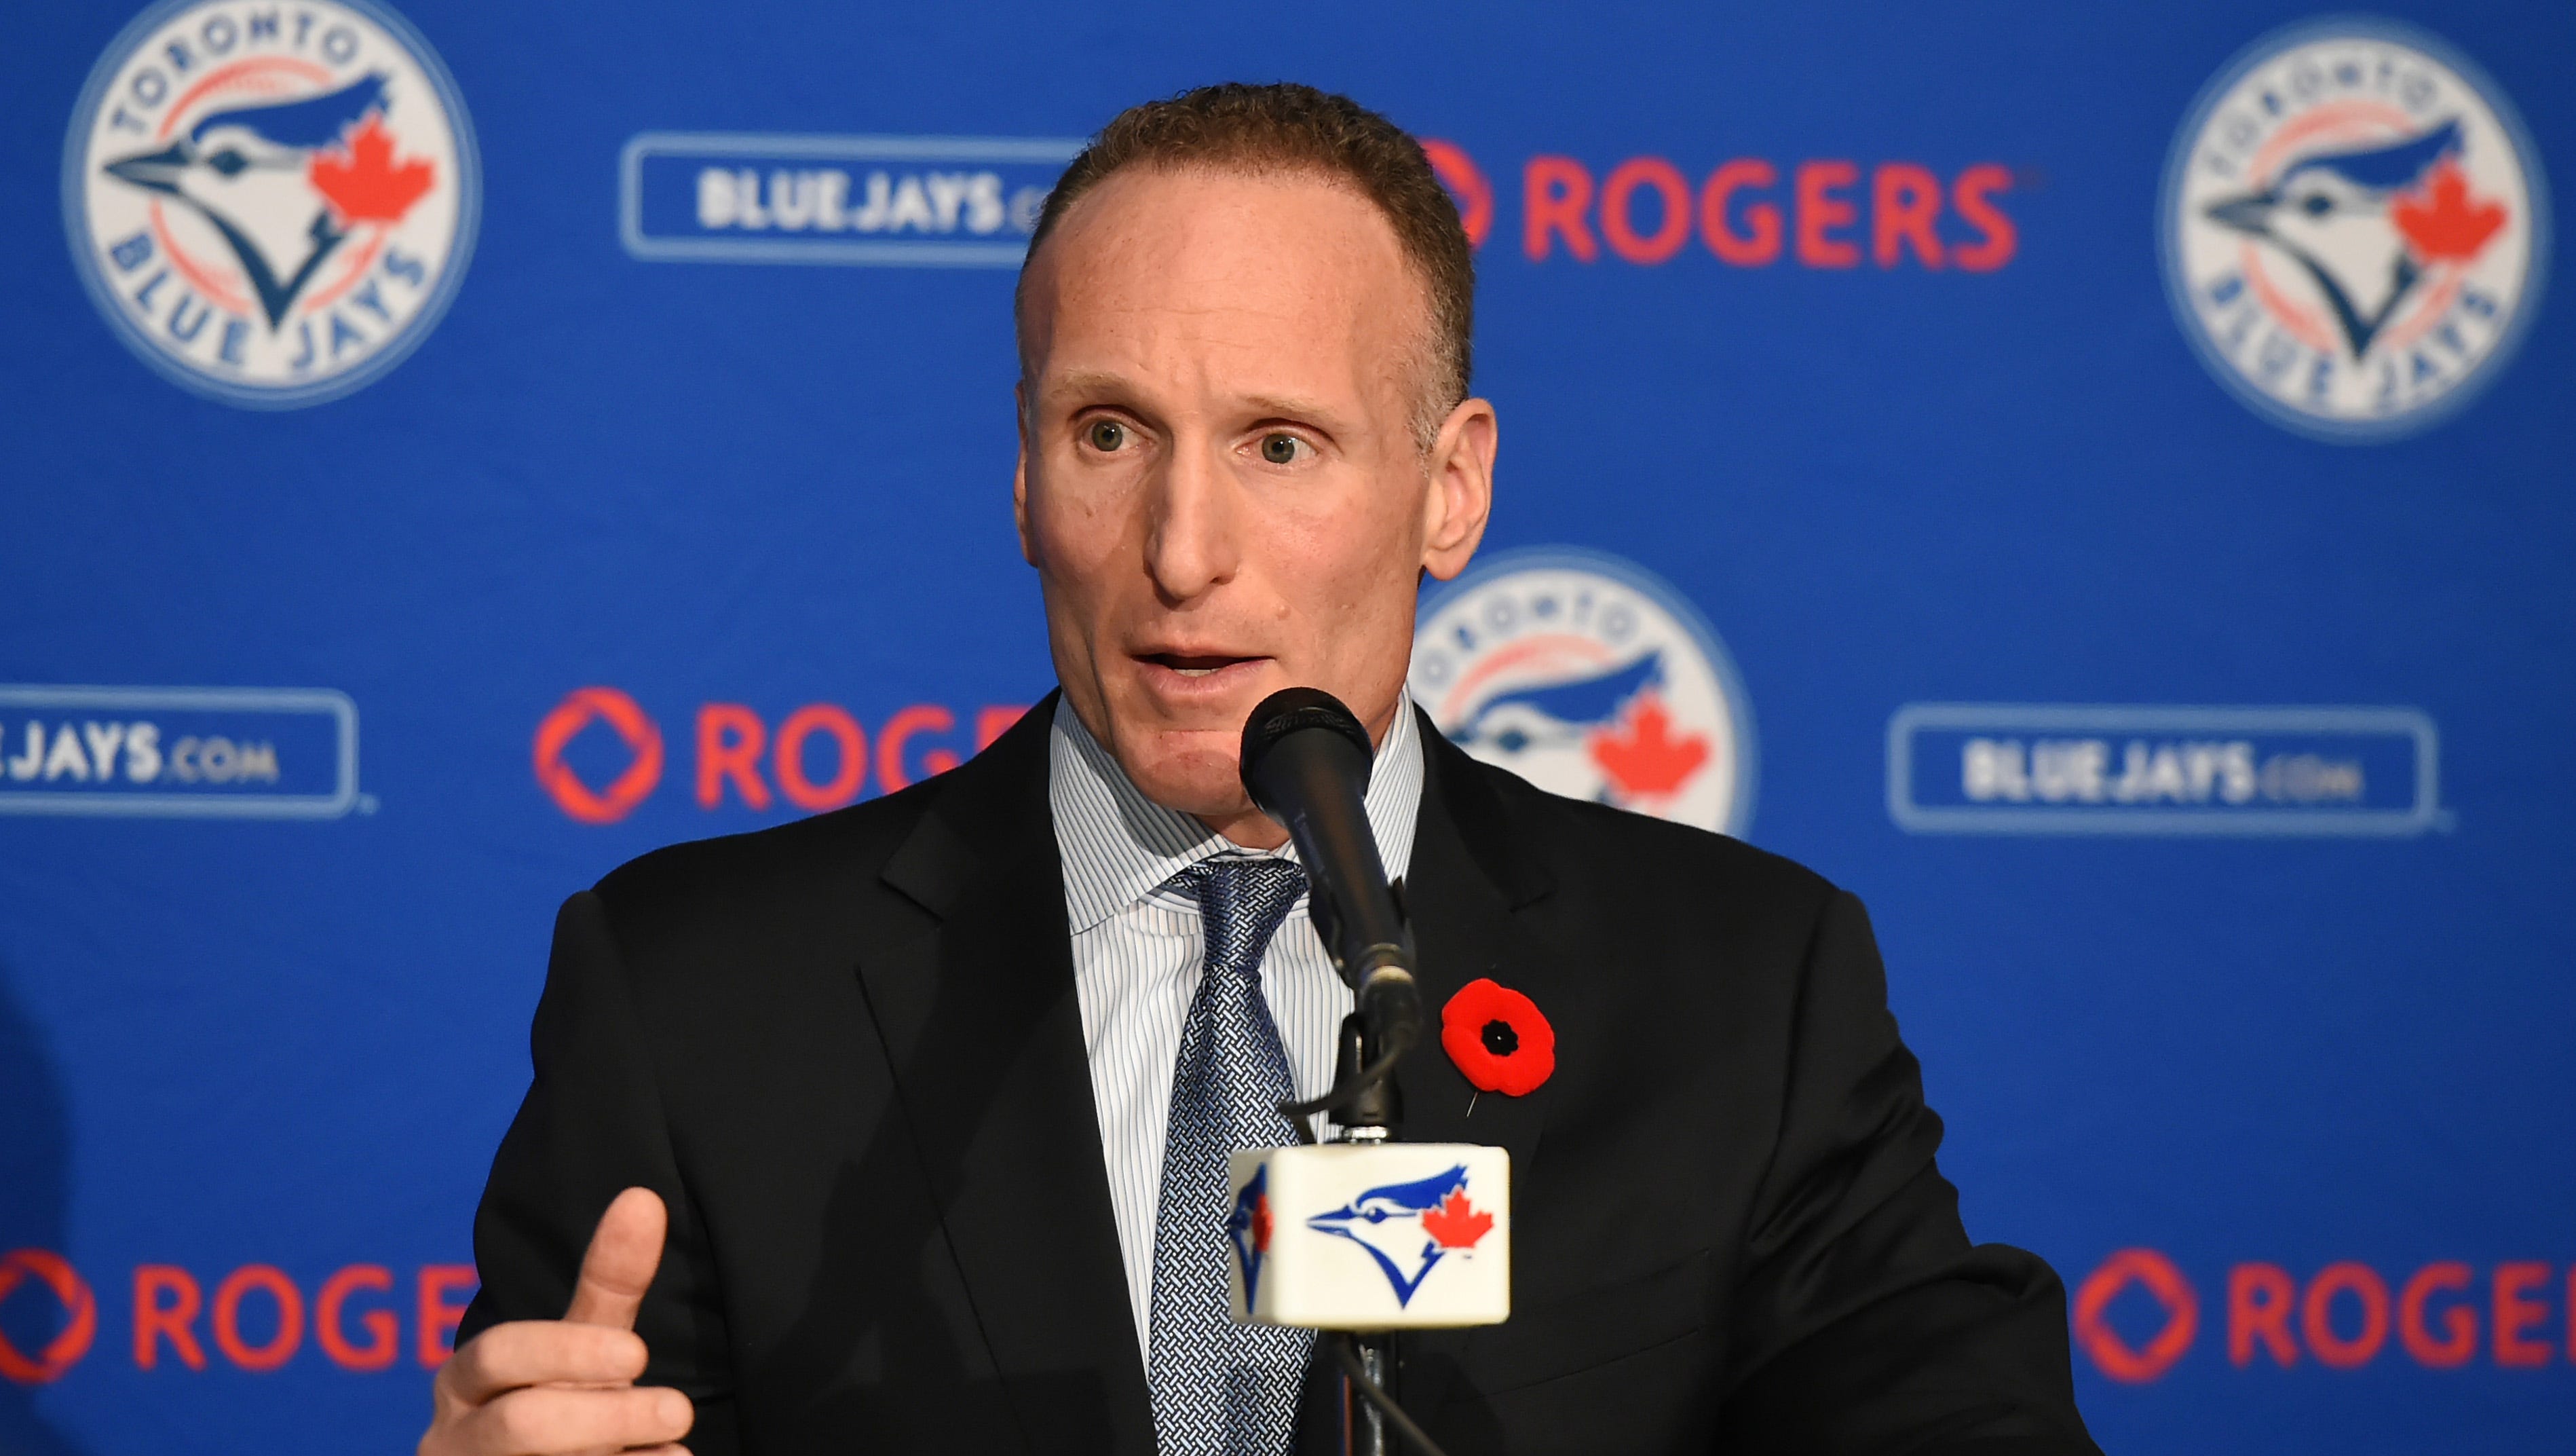 The only Canadian team in the MLB extended team President for five years.